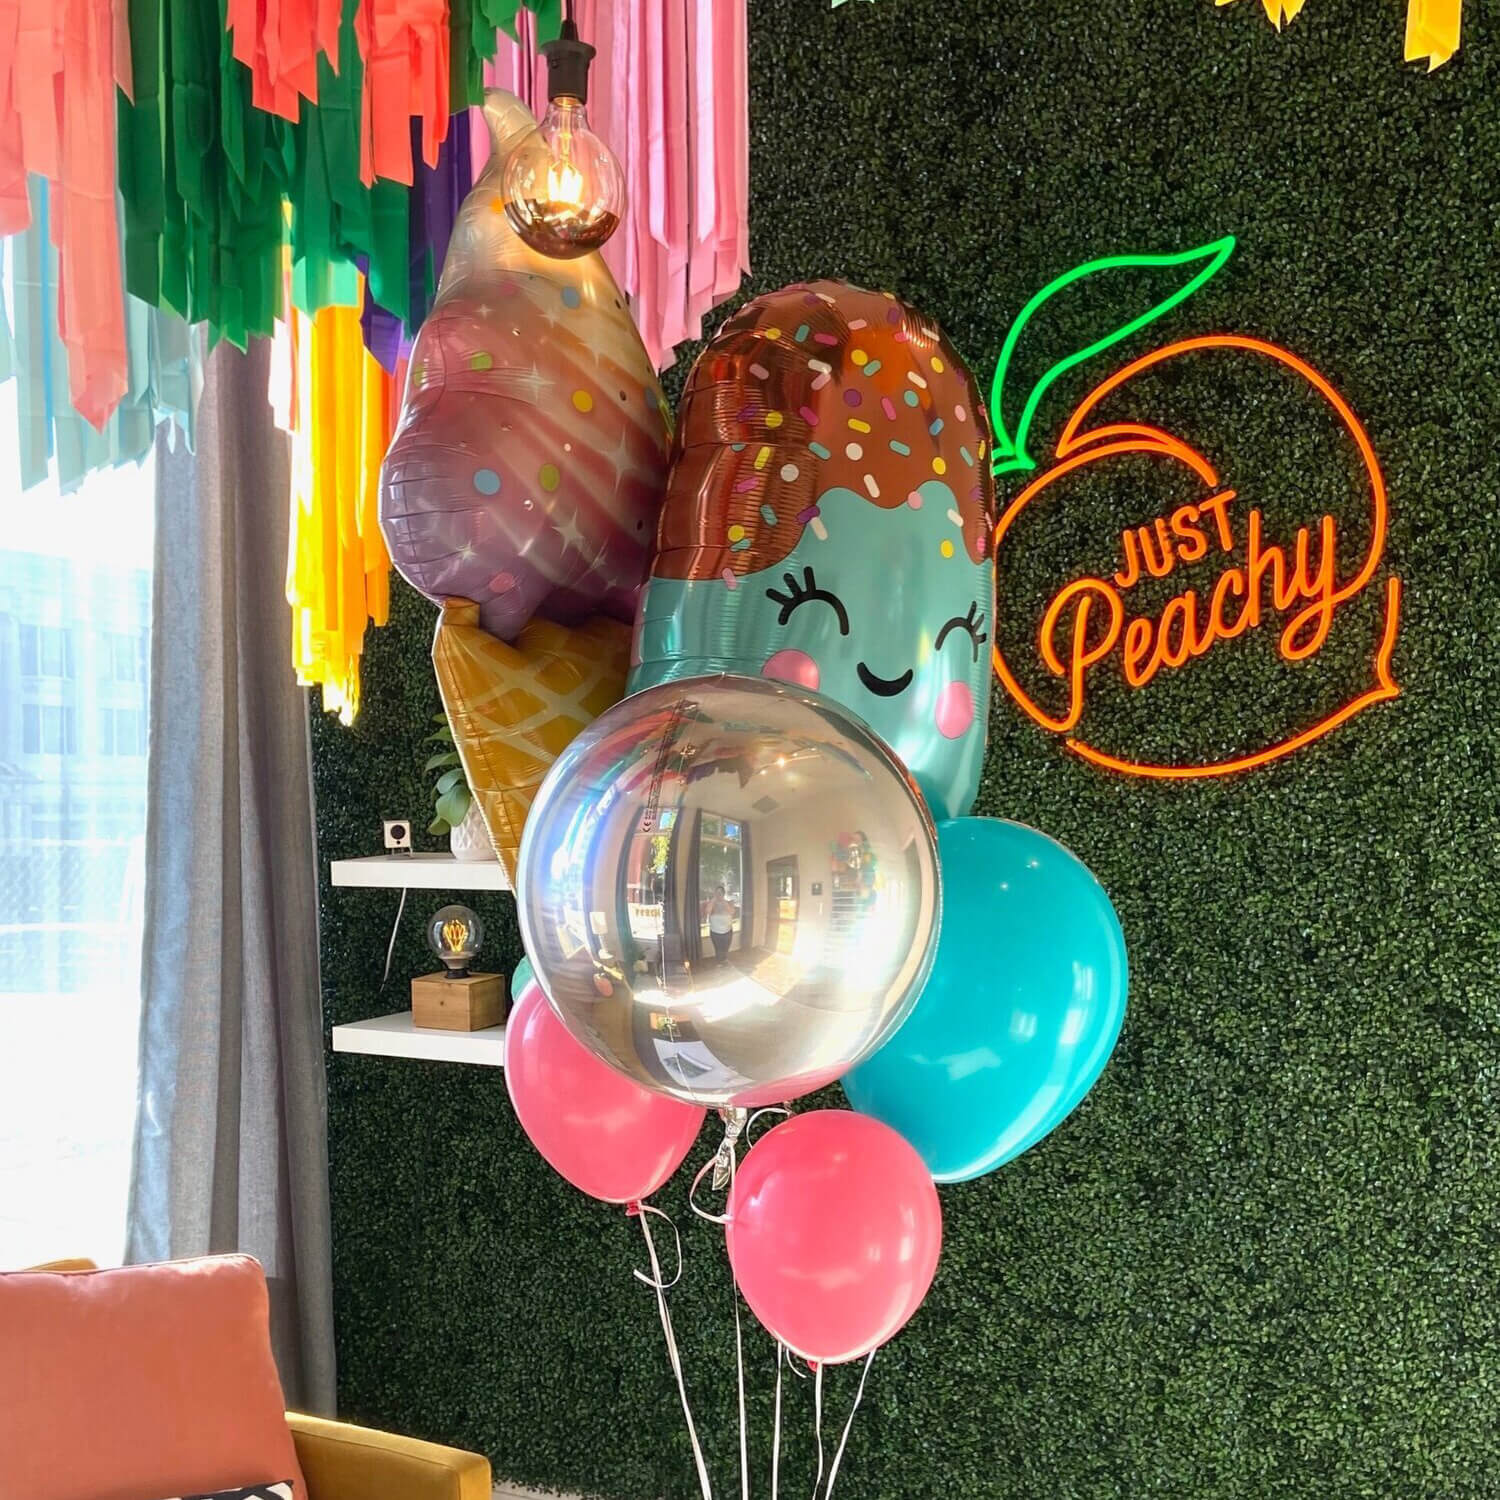 Oversized helium bouquet with ice cream cone, popsicle, and shiny orb balloons from Just Peachy in Little Rock, Arkansas.